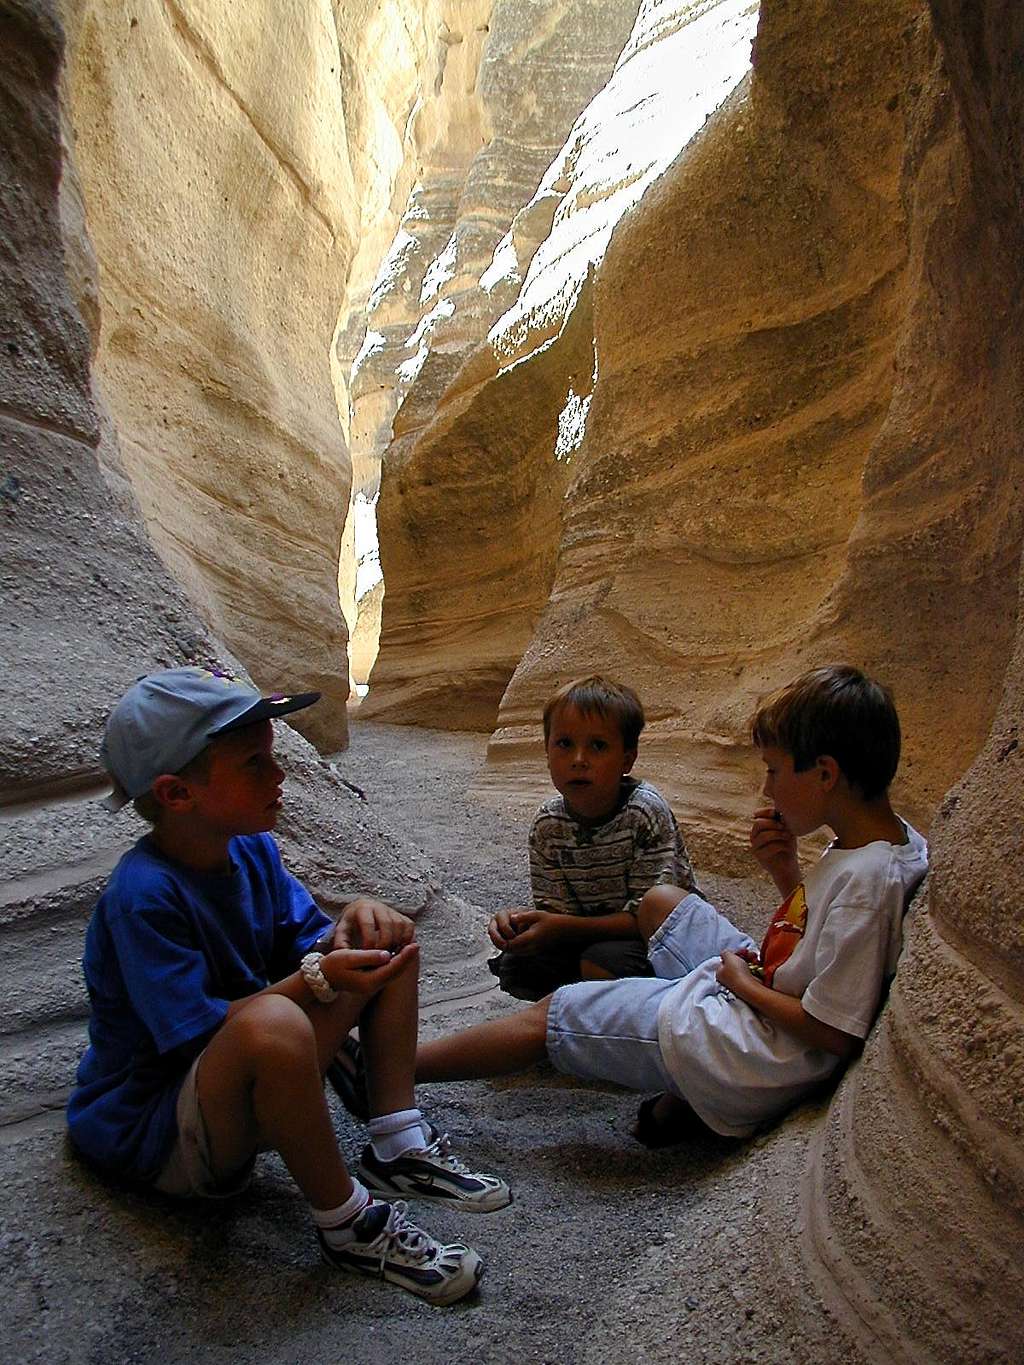 Boys playing inside the canyon